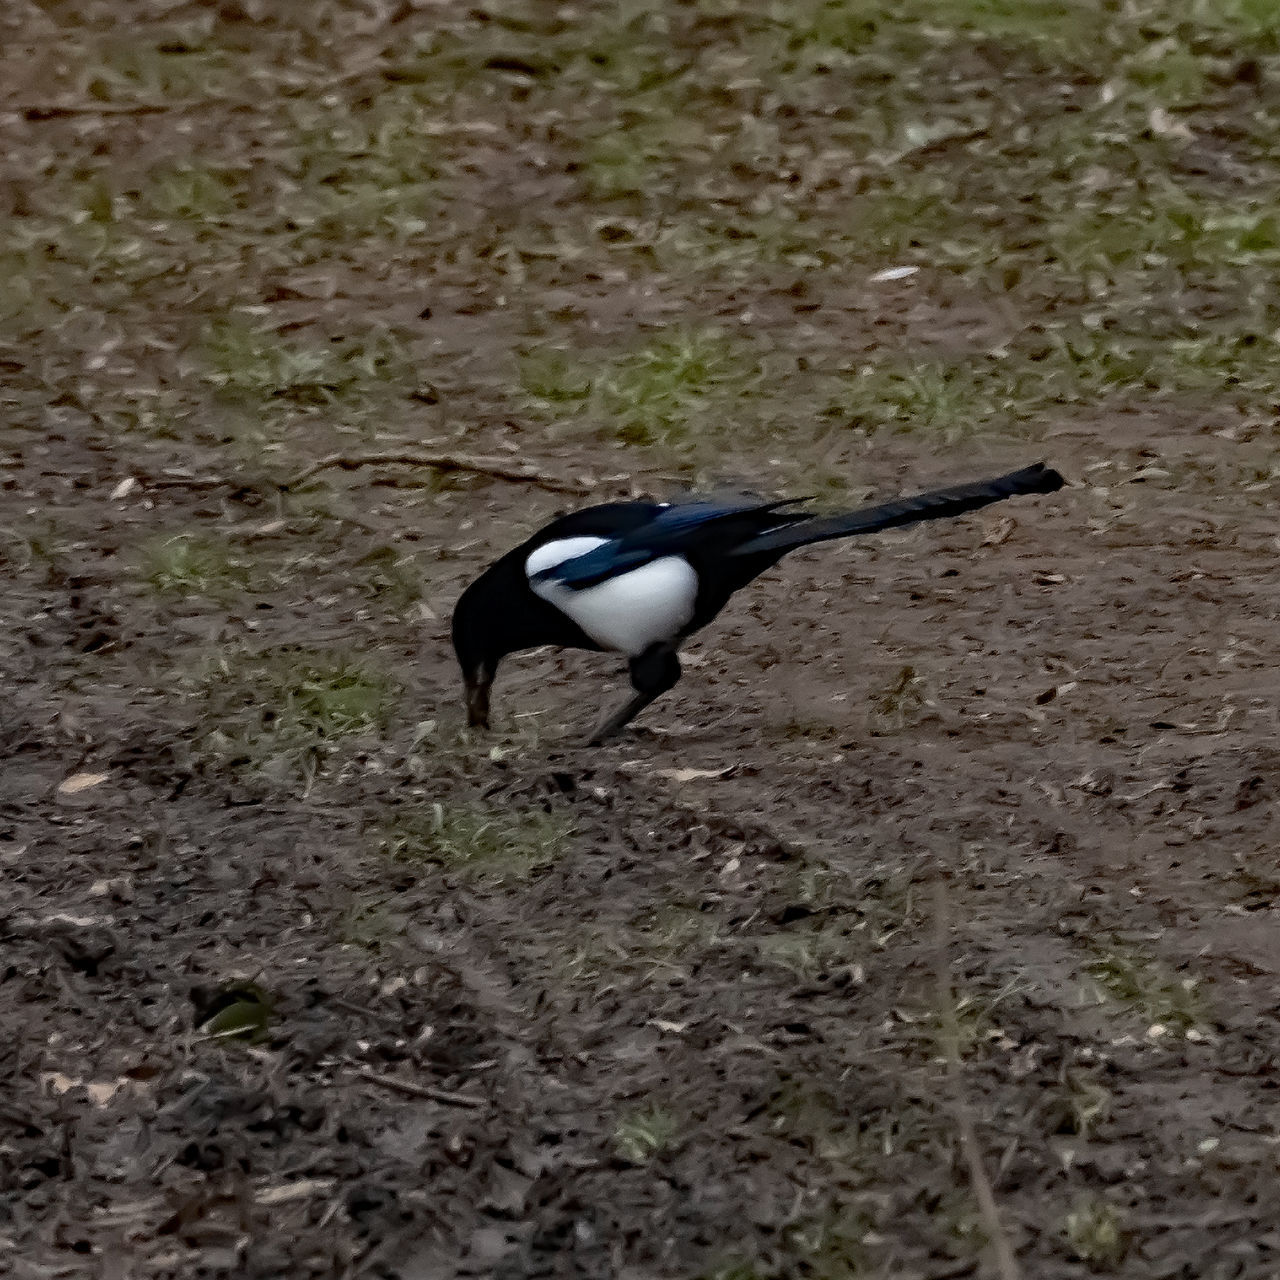 HIGH ANGLE VIEW OF BIRD FLYING IN THE GROUND